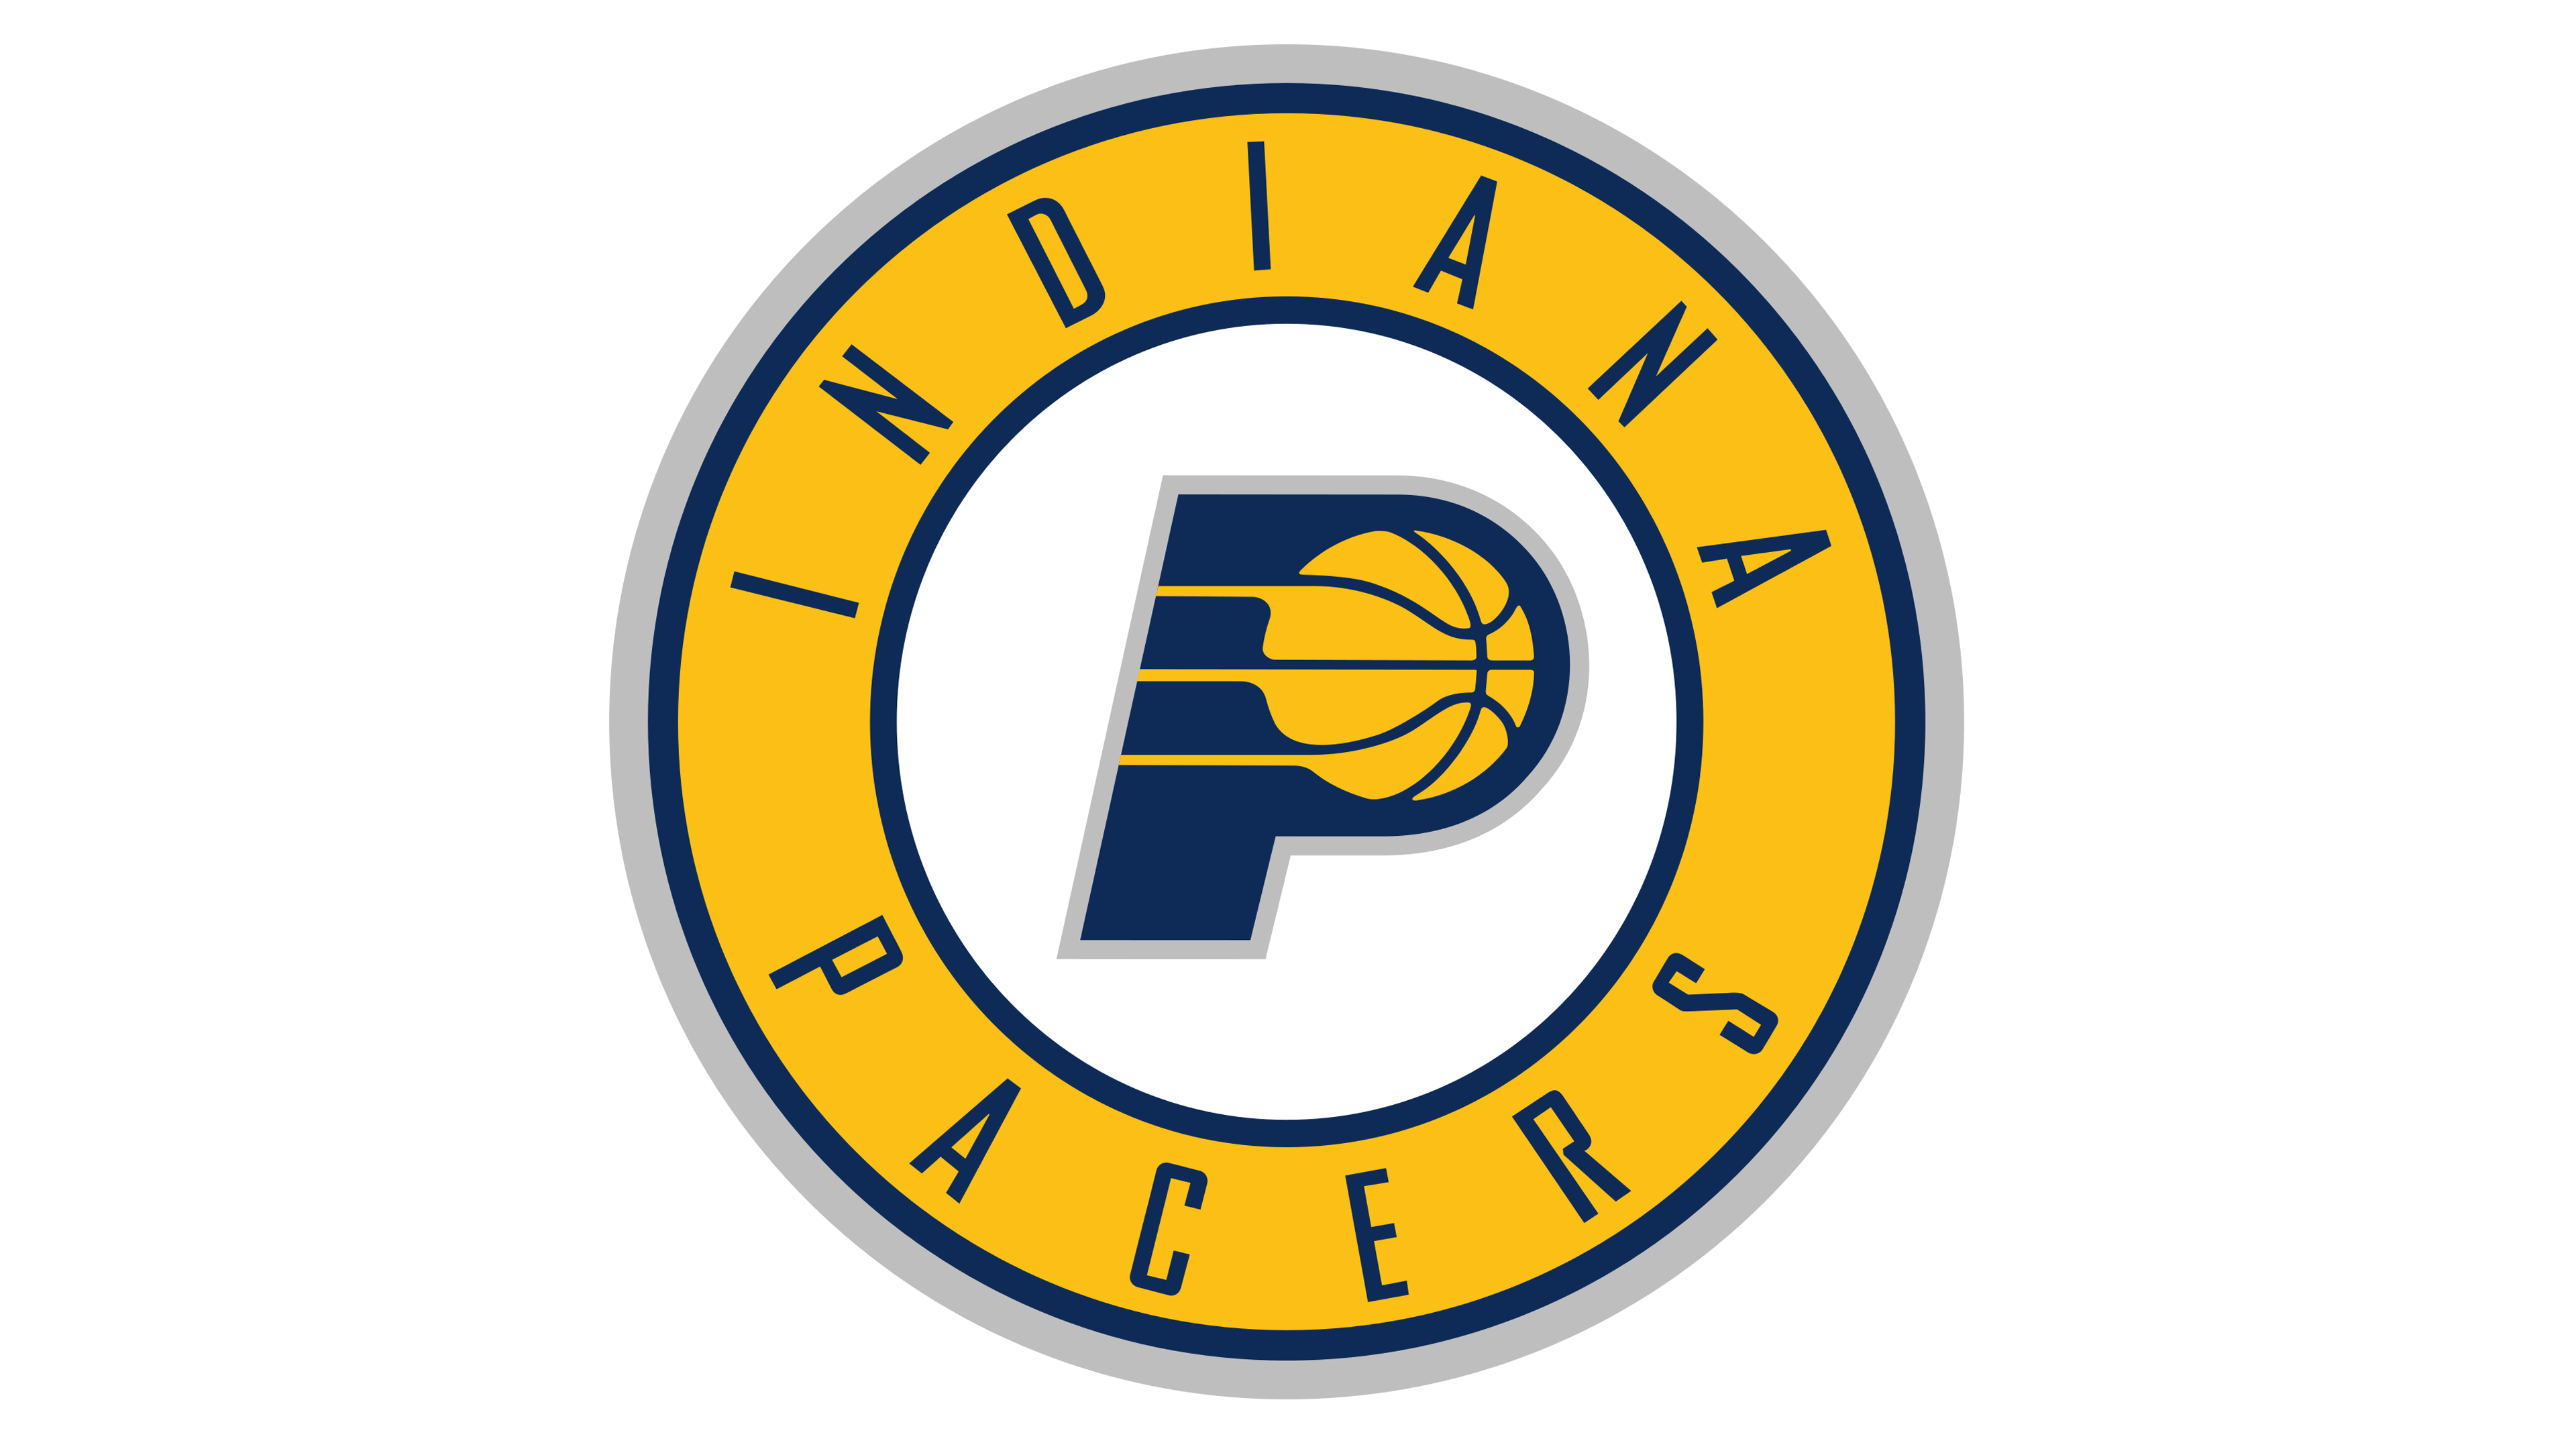 Indiana Logo - Indiana Pacers logo History of the Team Name and emblem